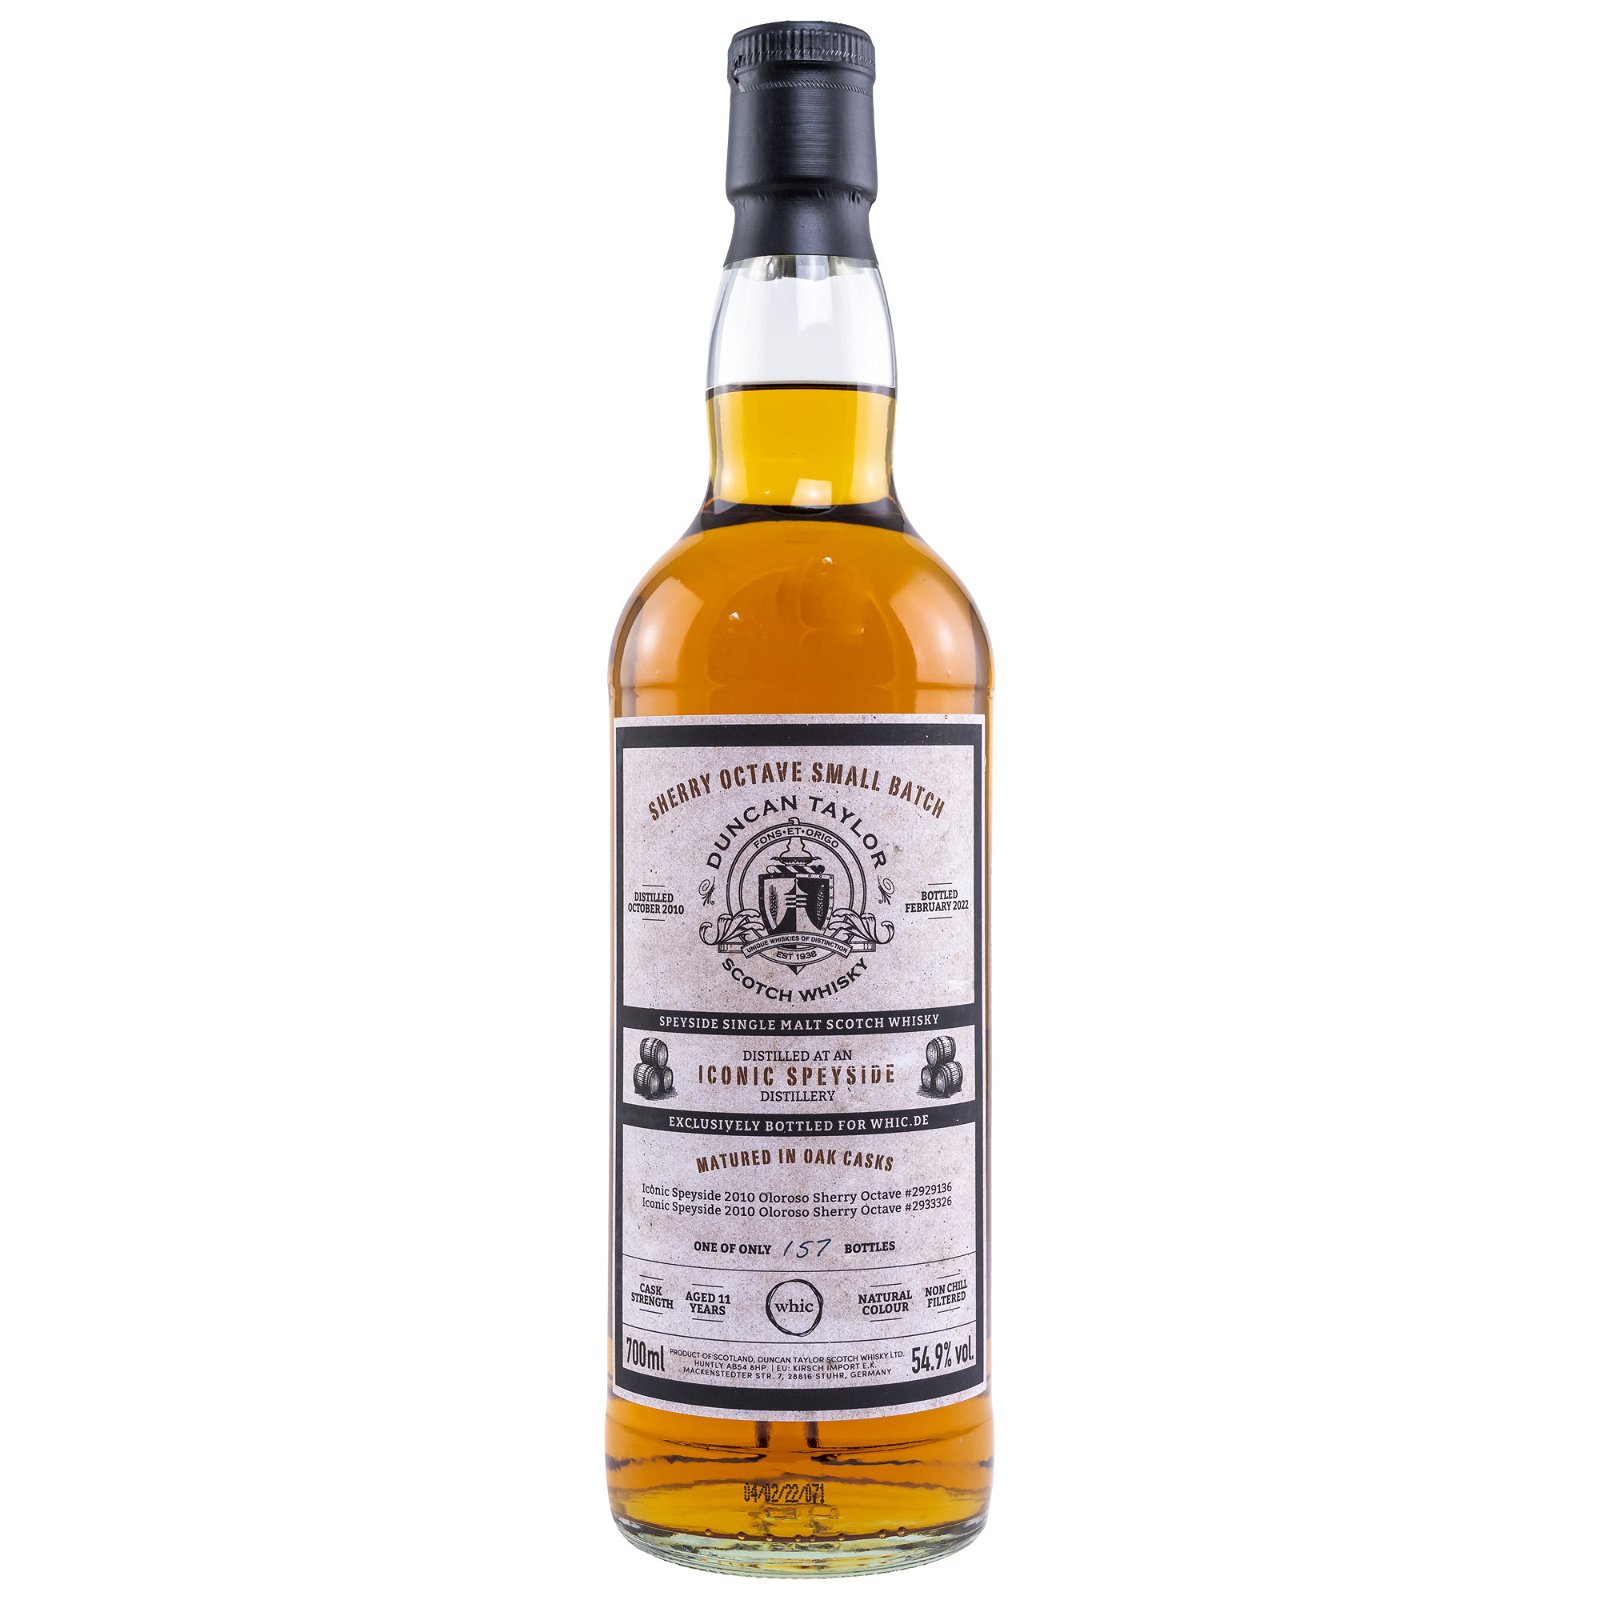 Iconic Speyside 2010/2022 - 11 Jahre Oloroso Sherry Octave Small Batch bottled for whic.de (Duncan Taylor)